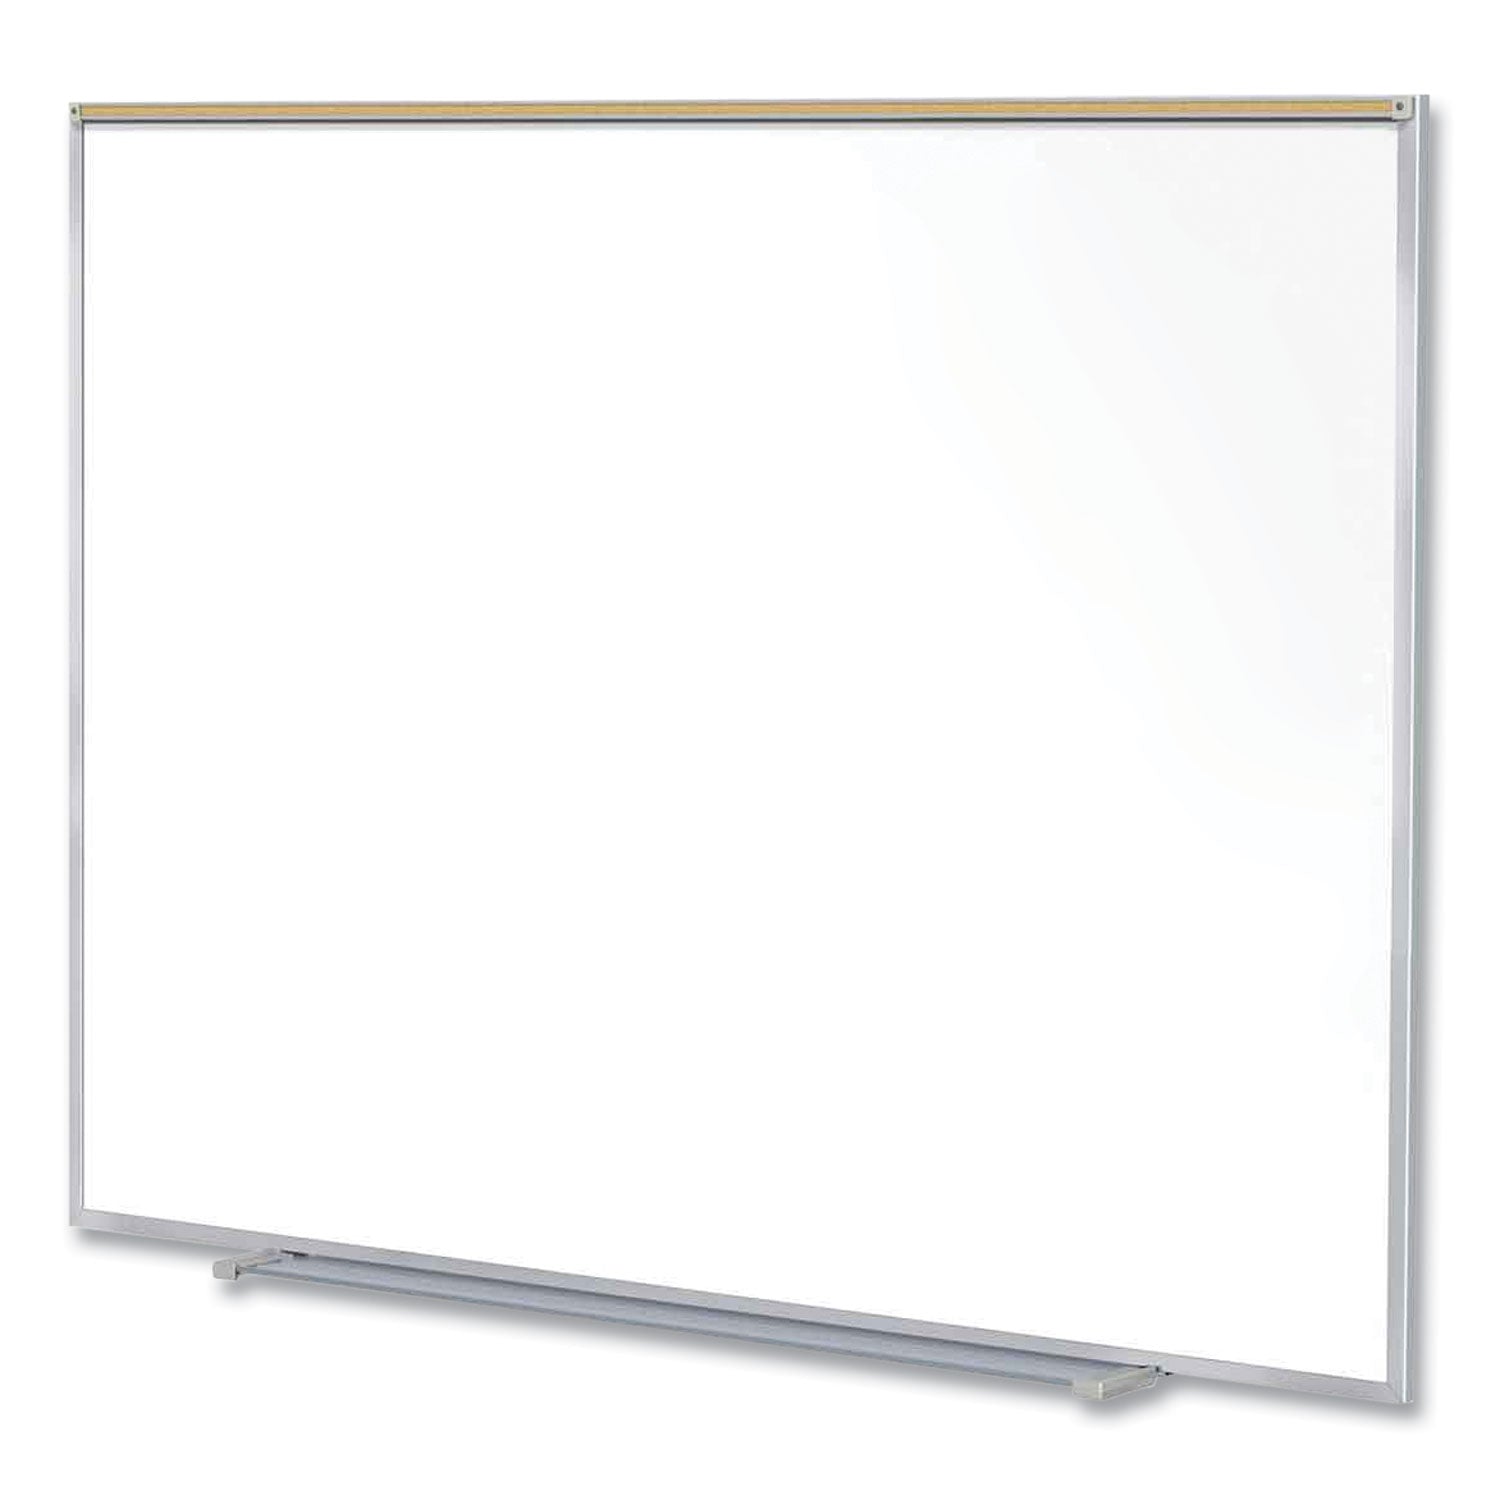 magnetic-porcelain-whiteboard-w-satin-aluminum-frame-and-map-rail-725-x-6047-white-surface-ships-in-7-10-business-days_ghem1p561m - 2